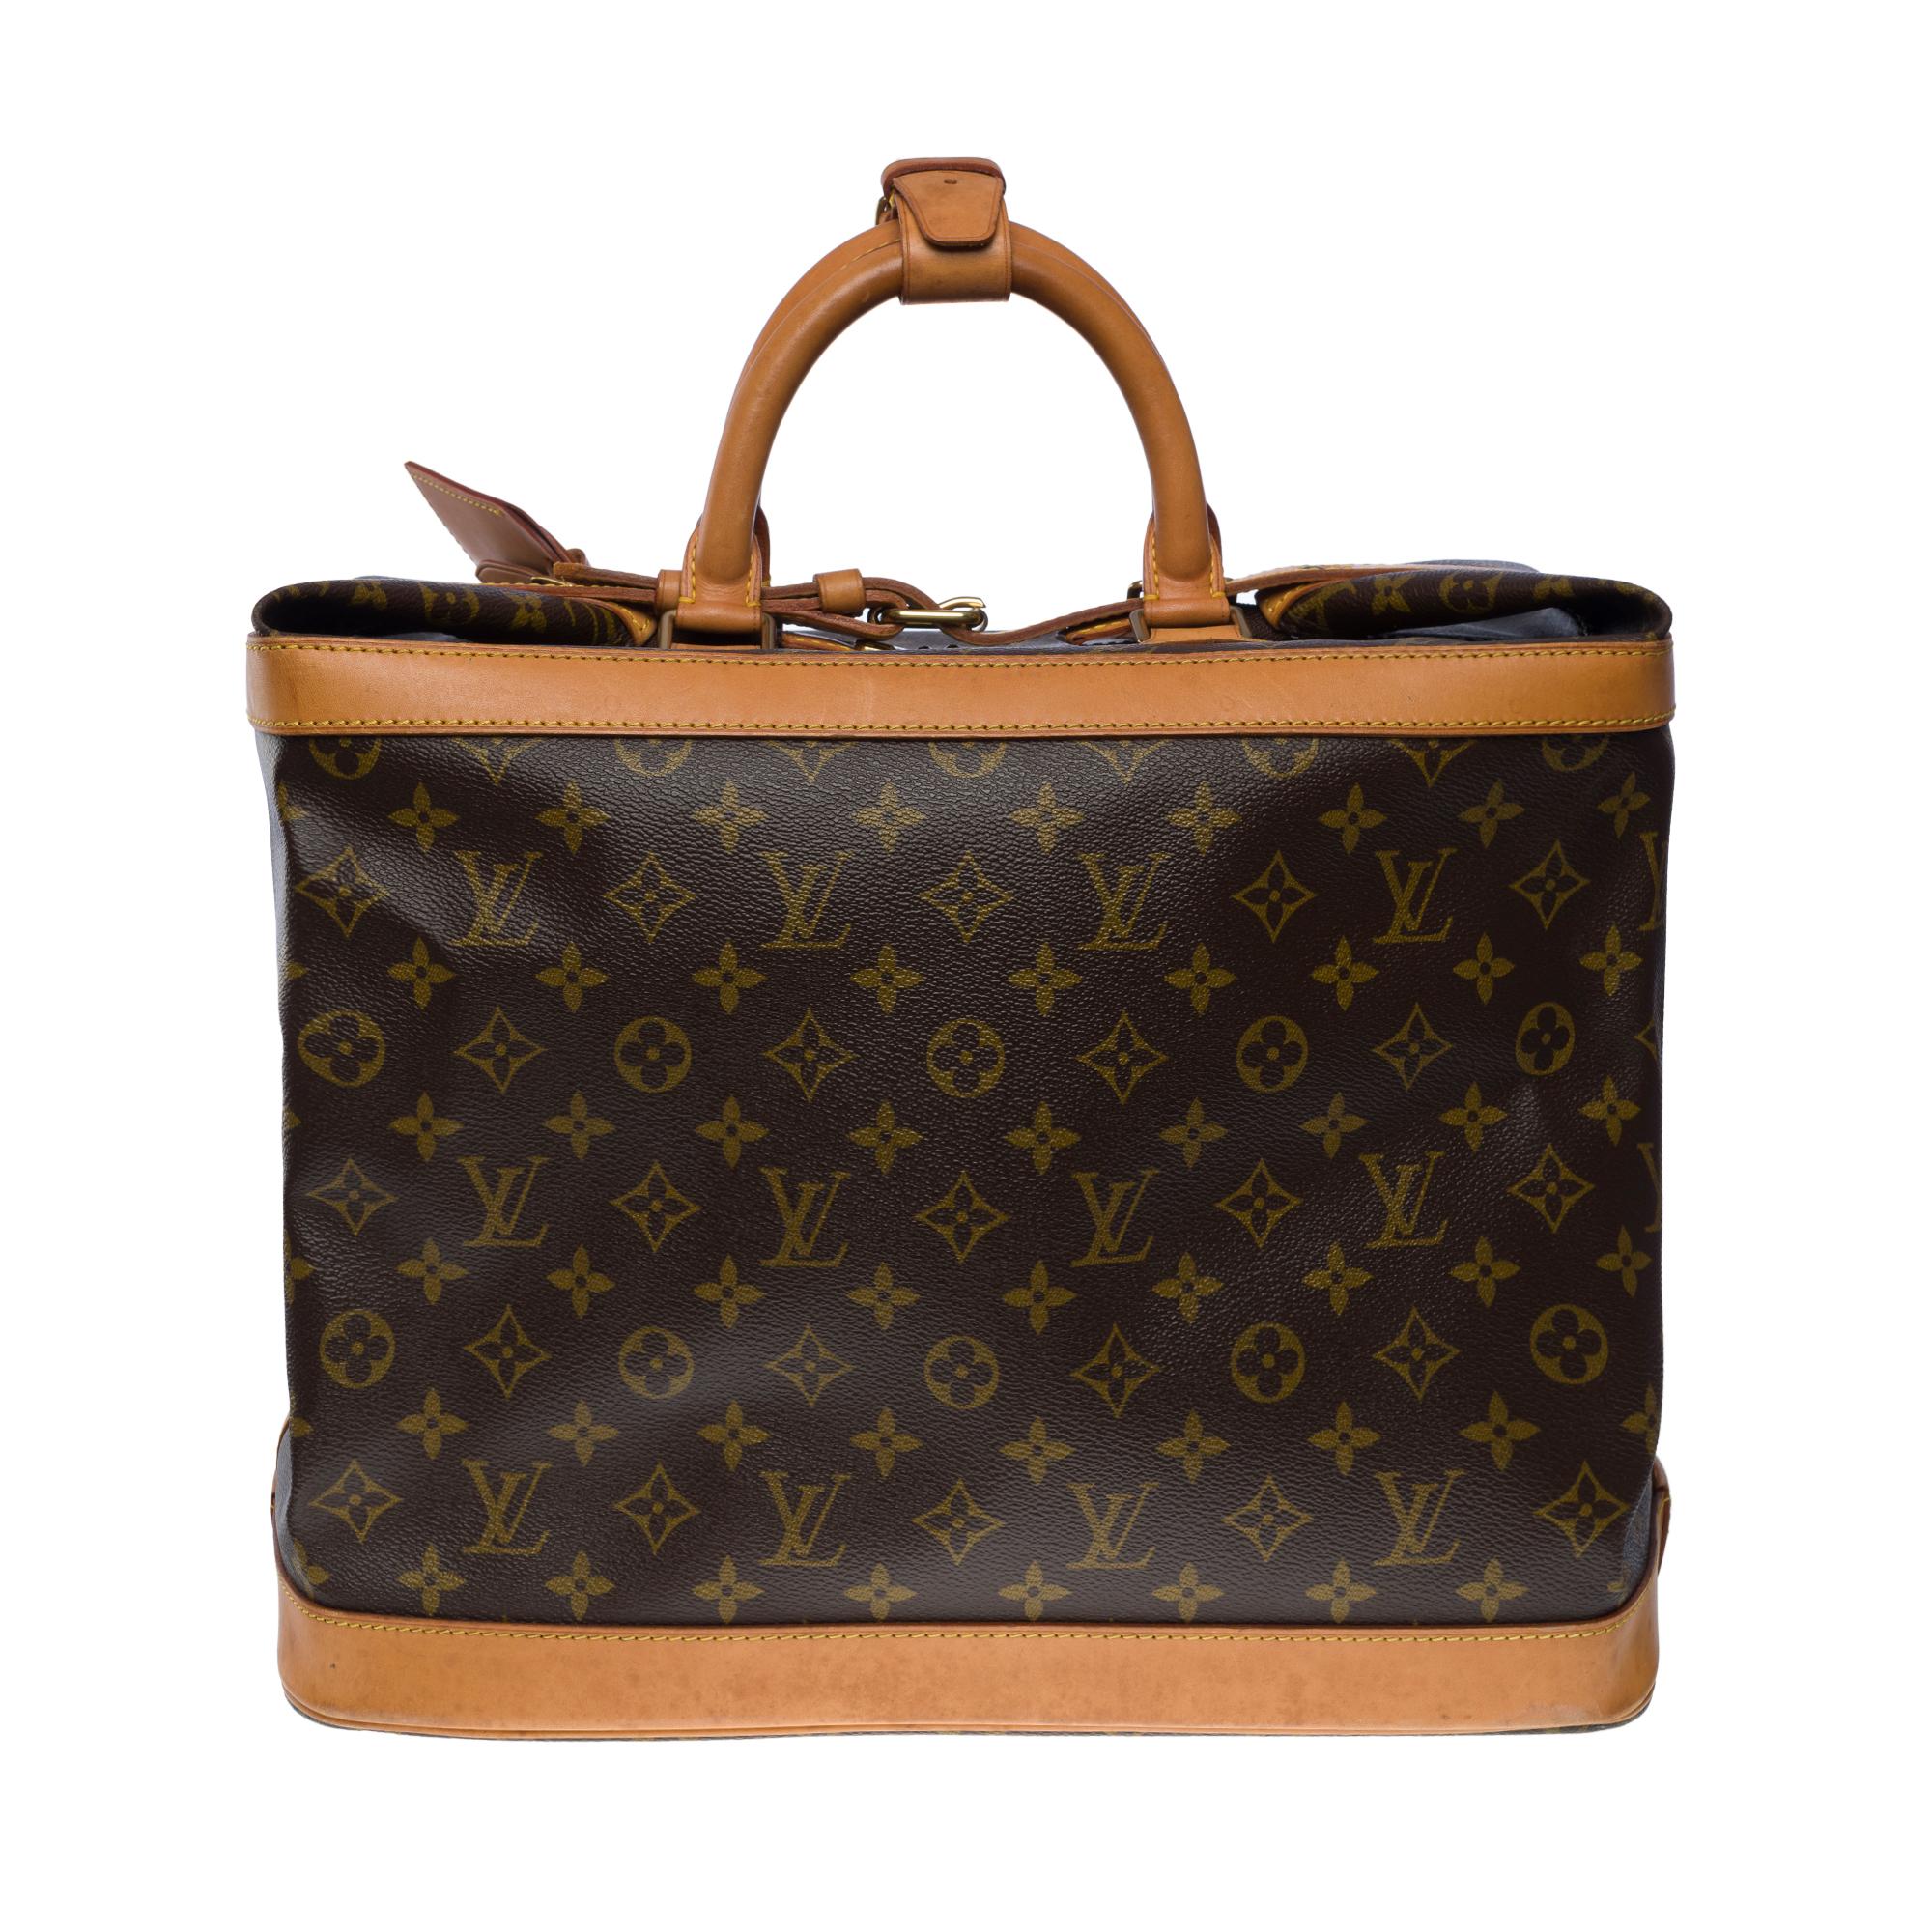 The indispensable Louis Vuitton Cruiser 40 travel bag in monogram coated canvas, gold plated metal hardware
Central zip closure on top and leather strap
Brown leather handles, brown leather grip and label holder
Brown canvas interior
5 feet of gold